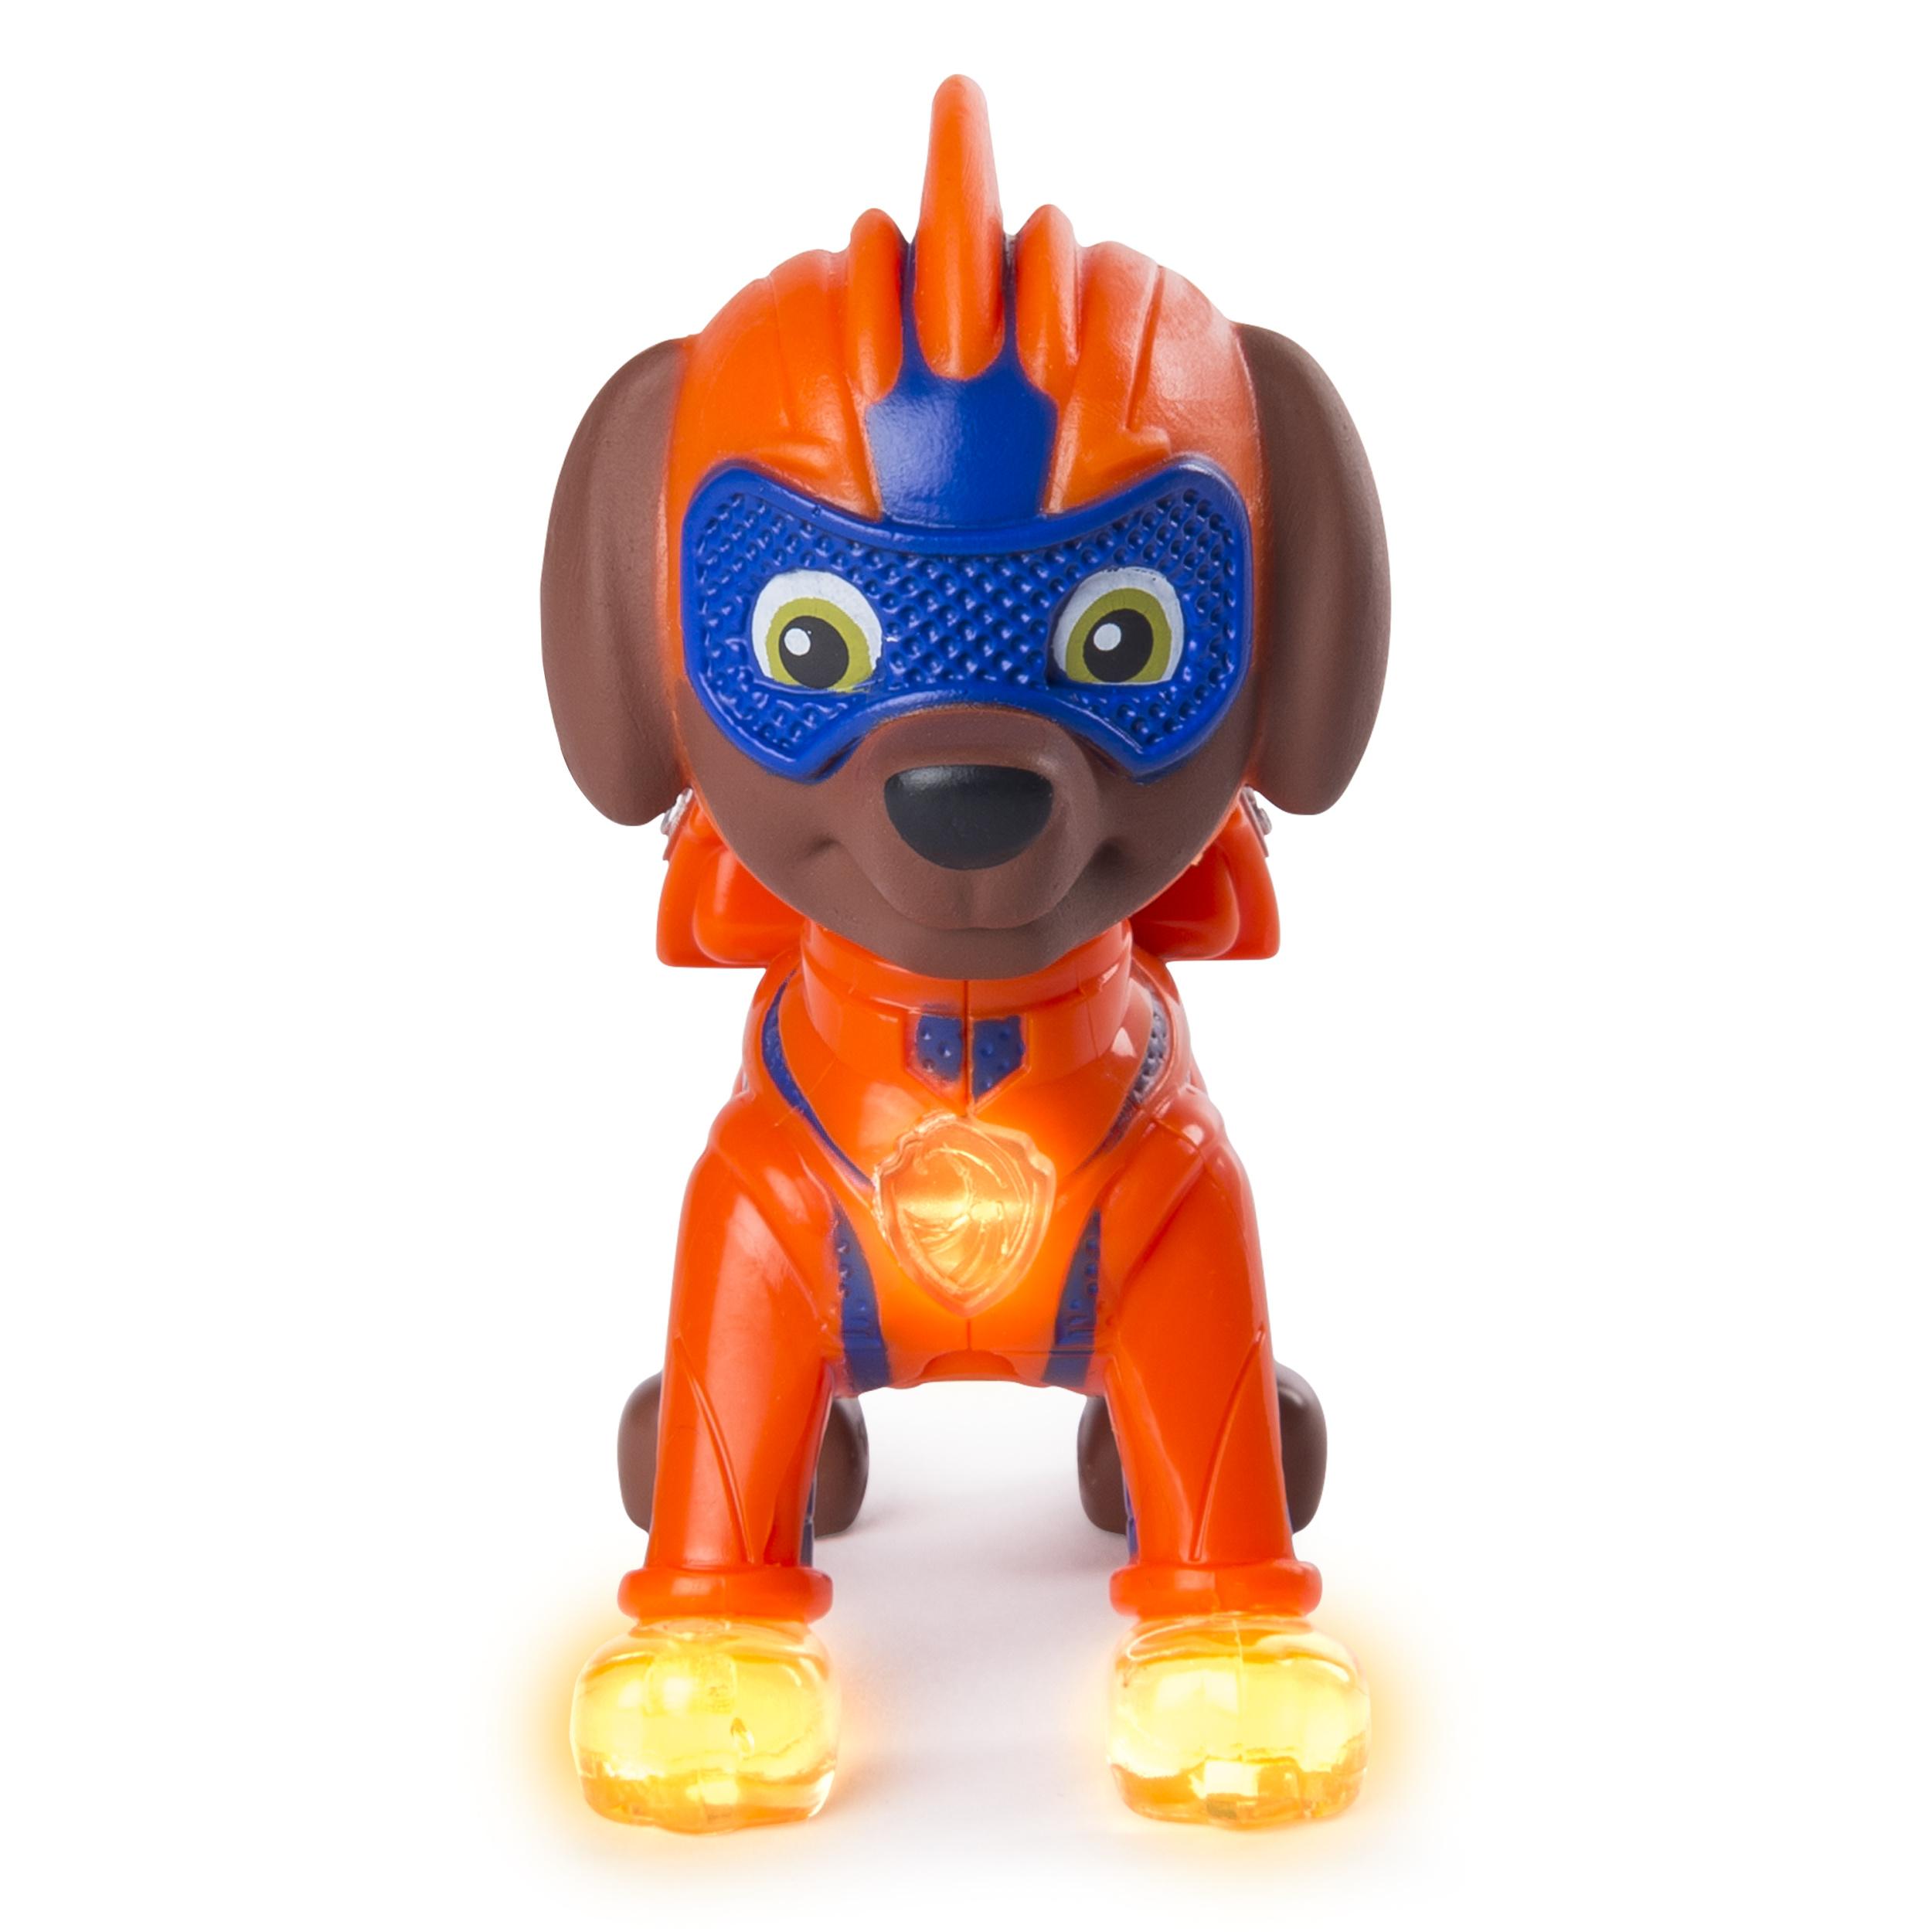 PAW Patrol Pups Zuma Figure With Light Up Badge And Paws, For Ages 3 And Up, Wal Mart Exclusive